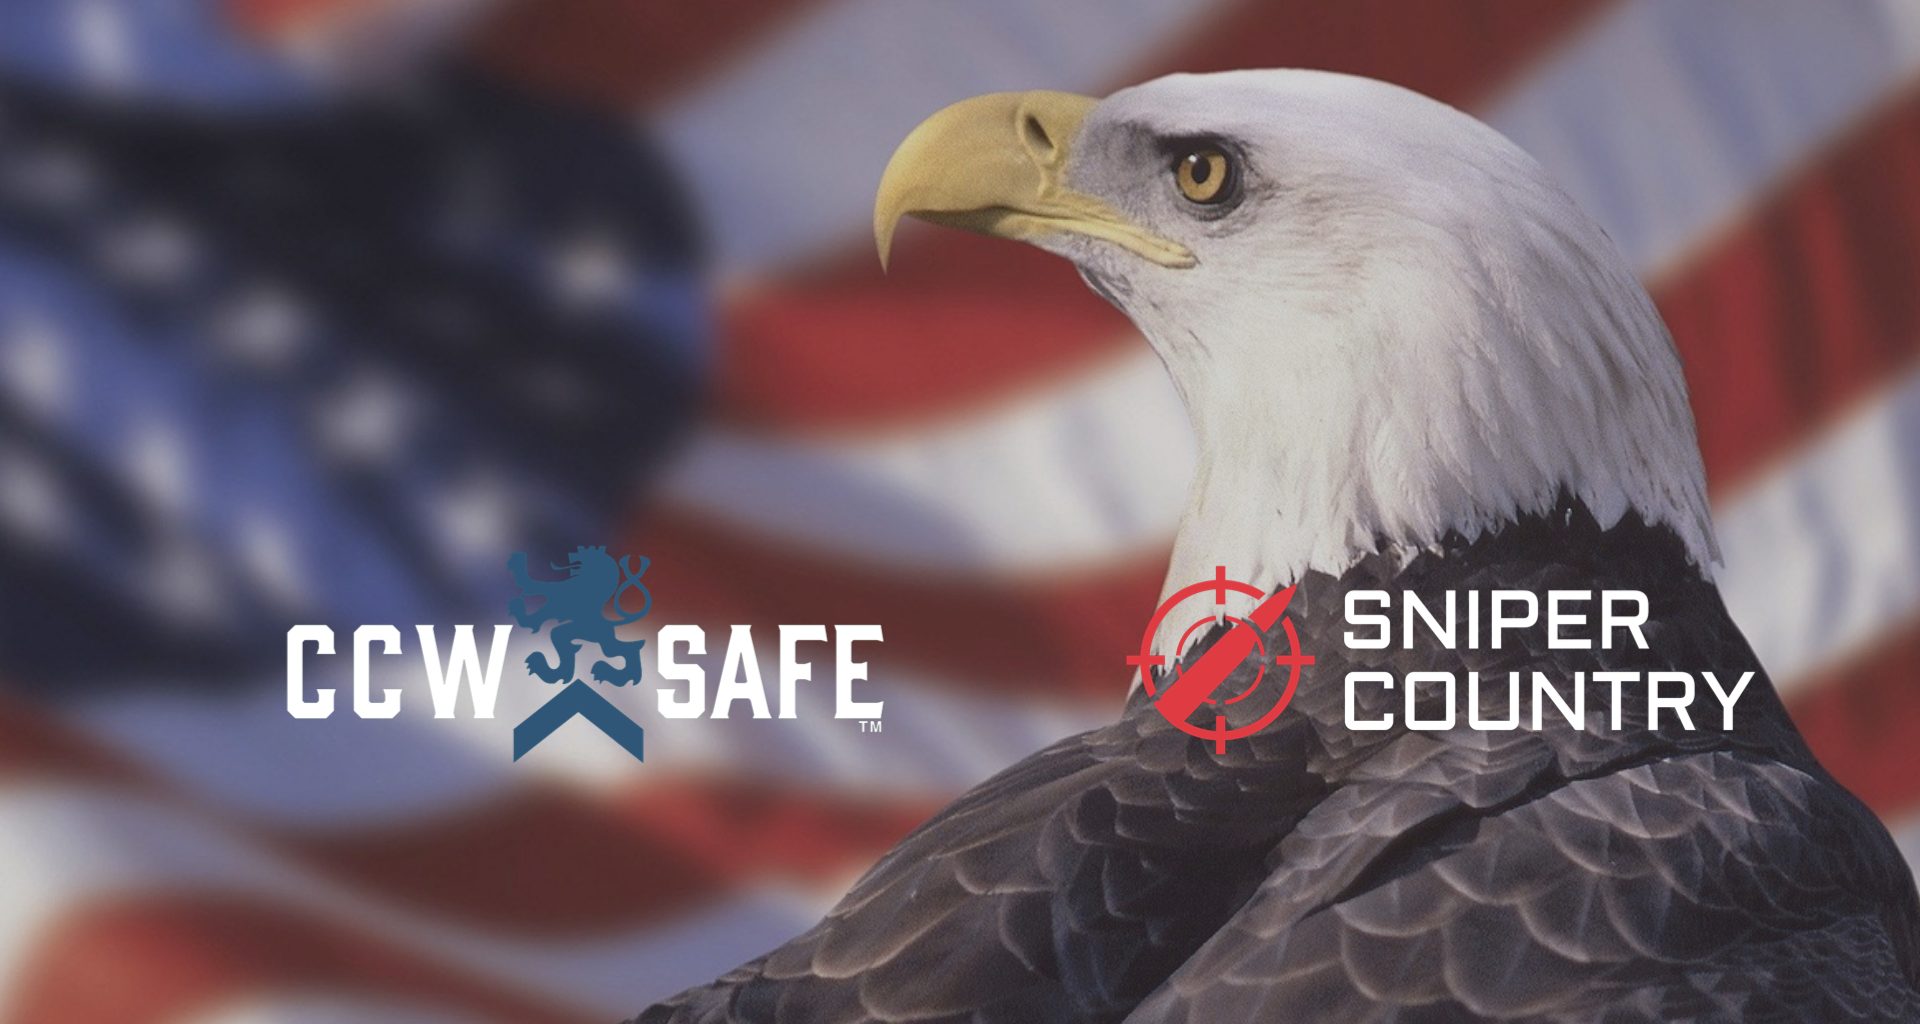 Sniper Country in discussion with concealed carry insurance provider CCW Safe